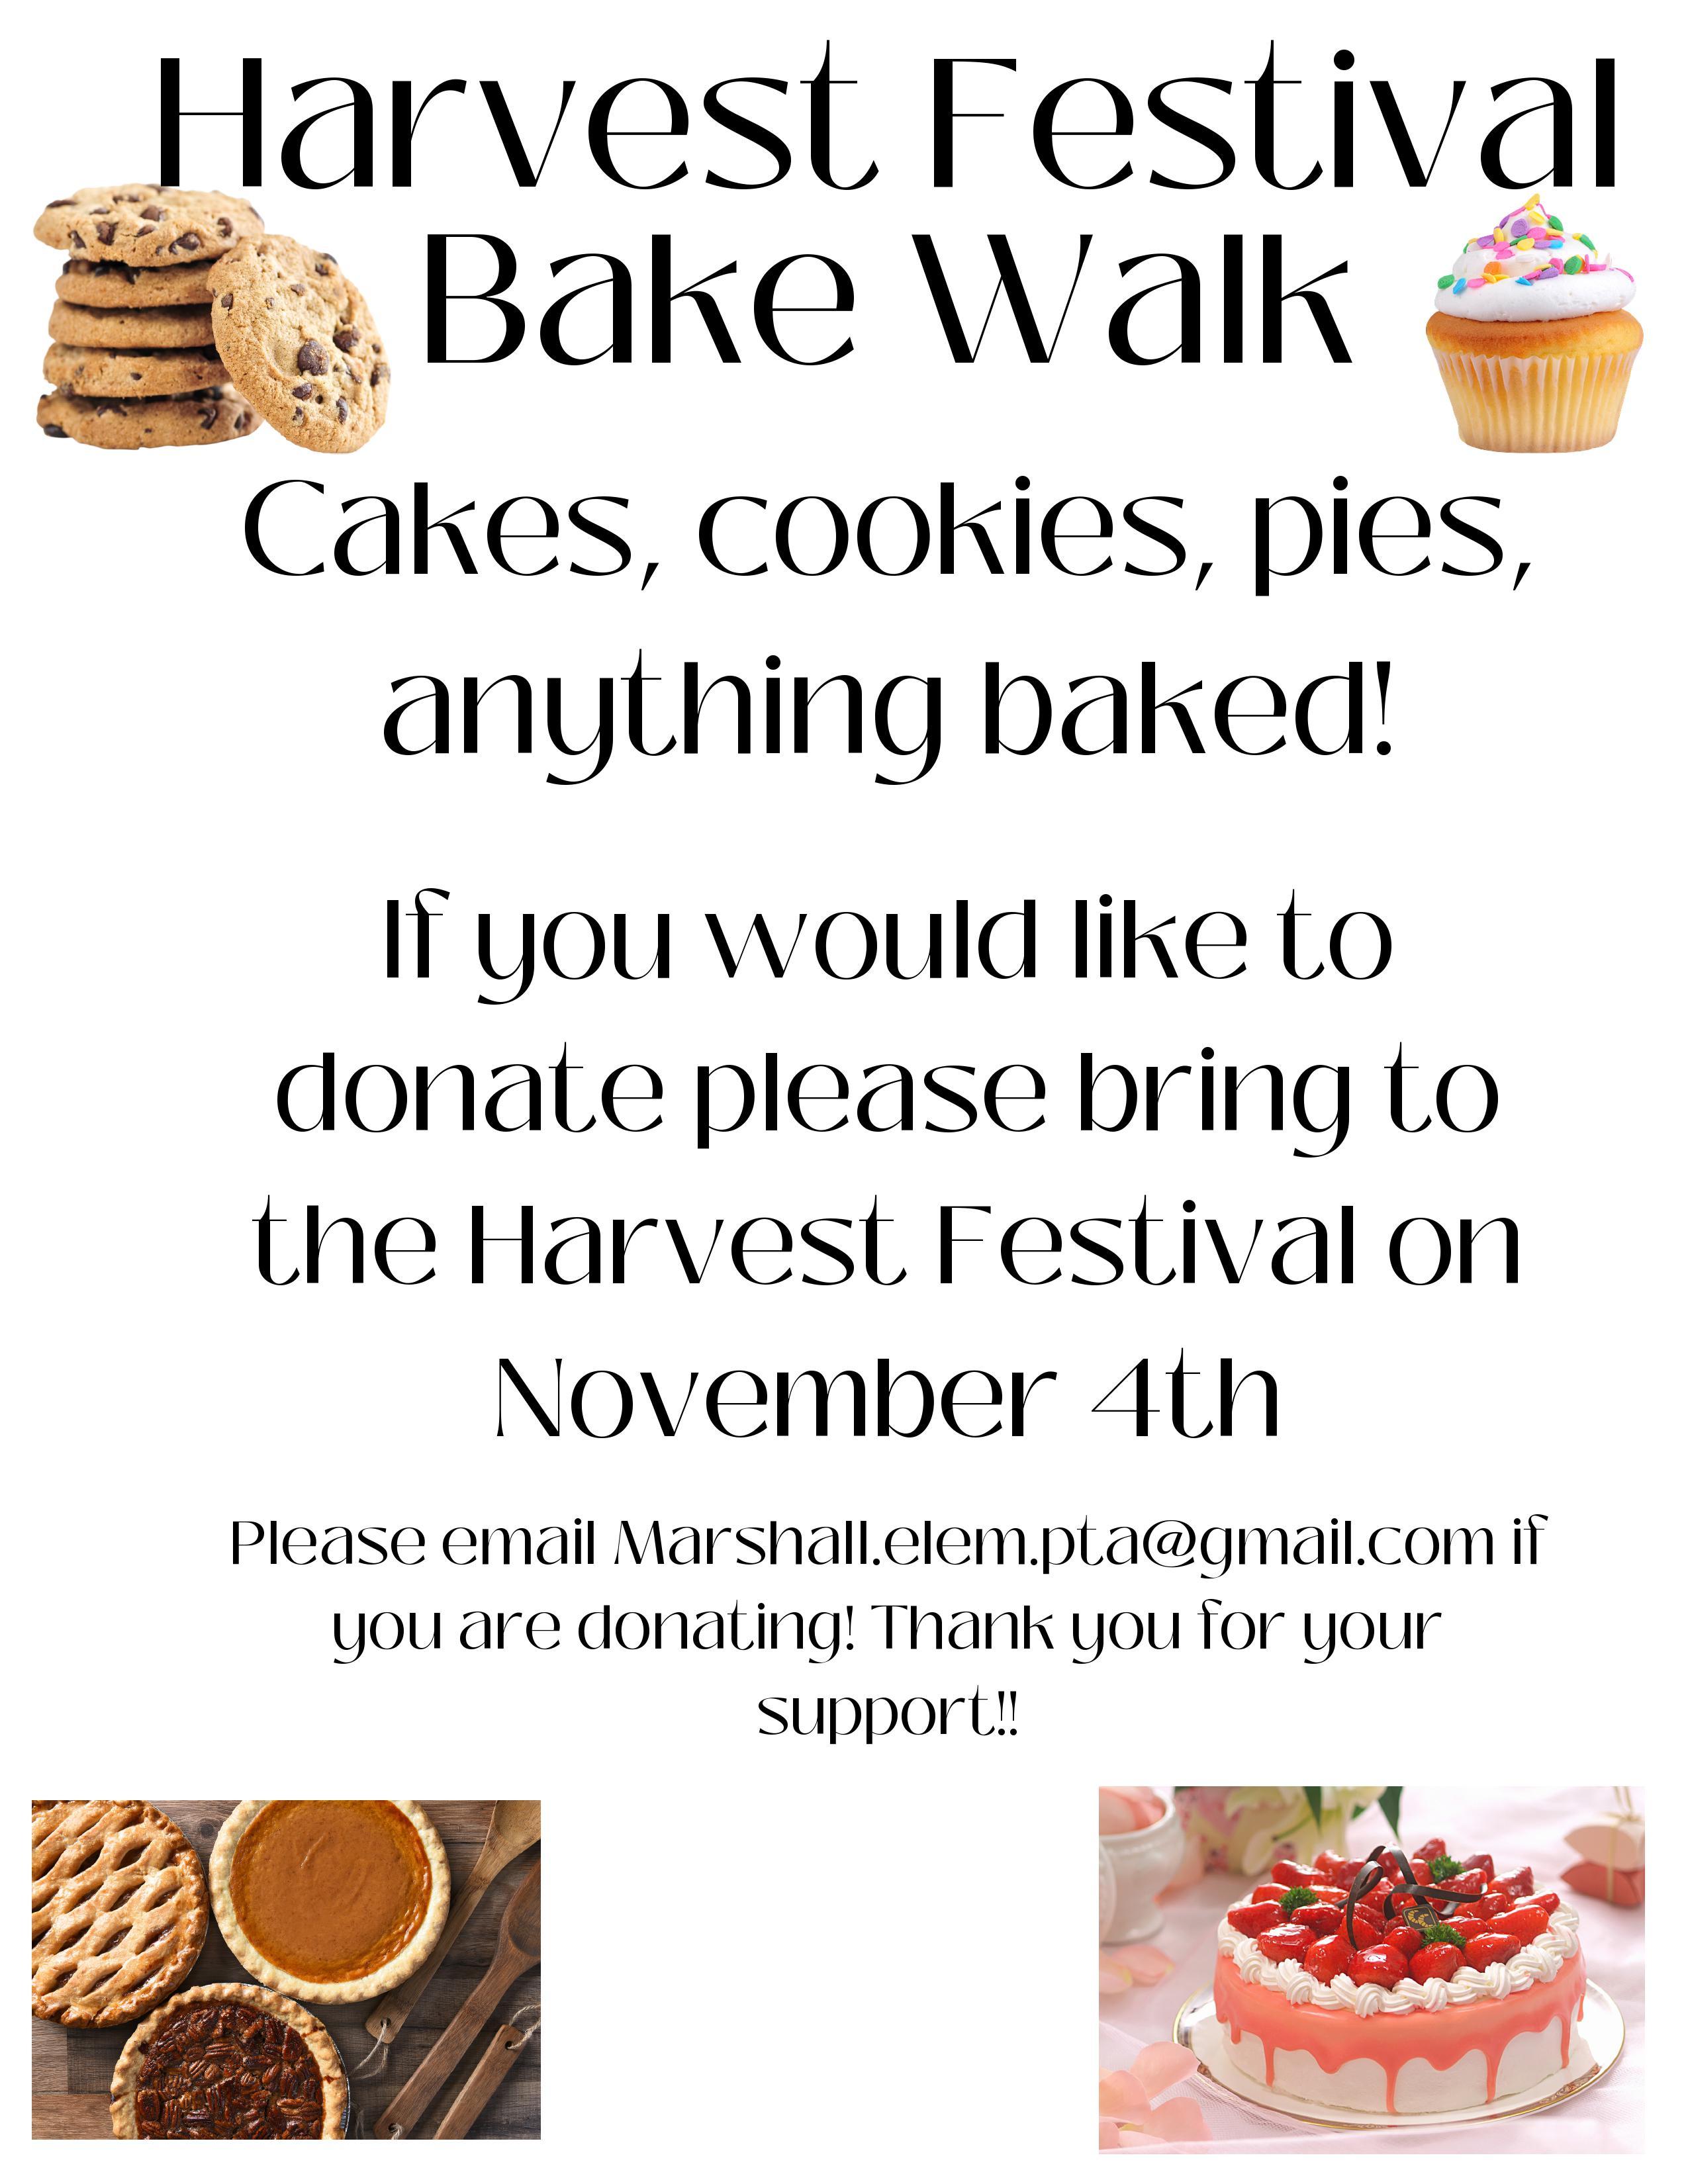 Please email marshall.elem.pta@gmail.com for further information and to declare any baked goods that you would like to donate.